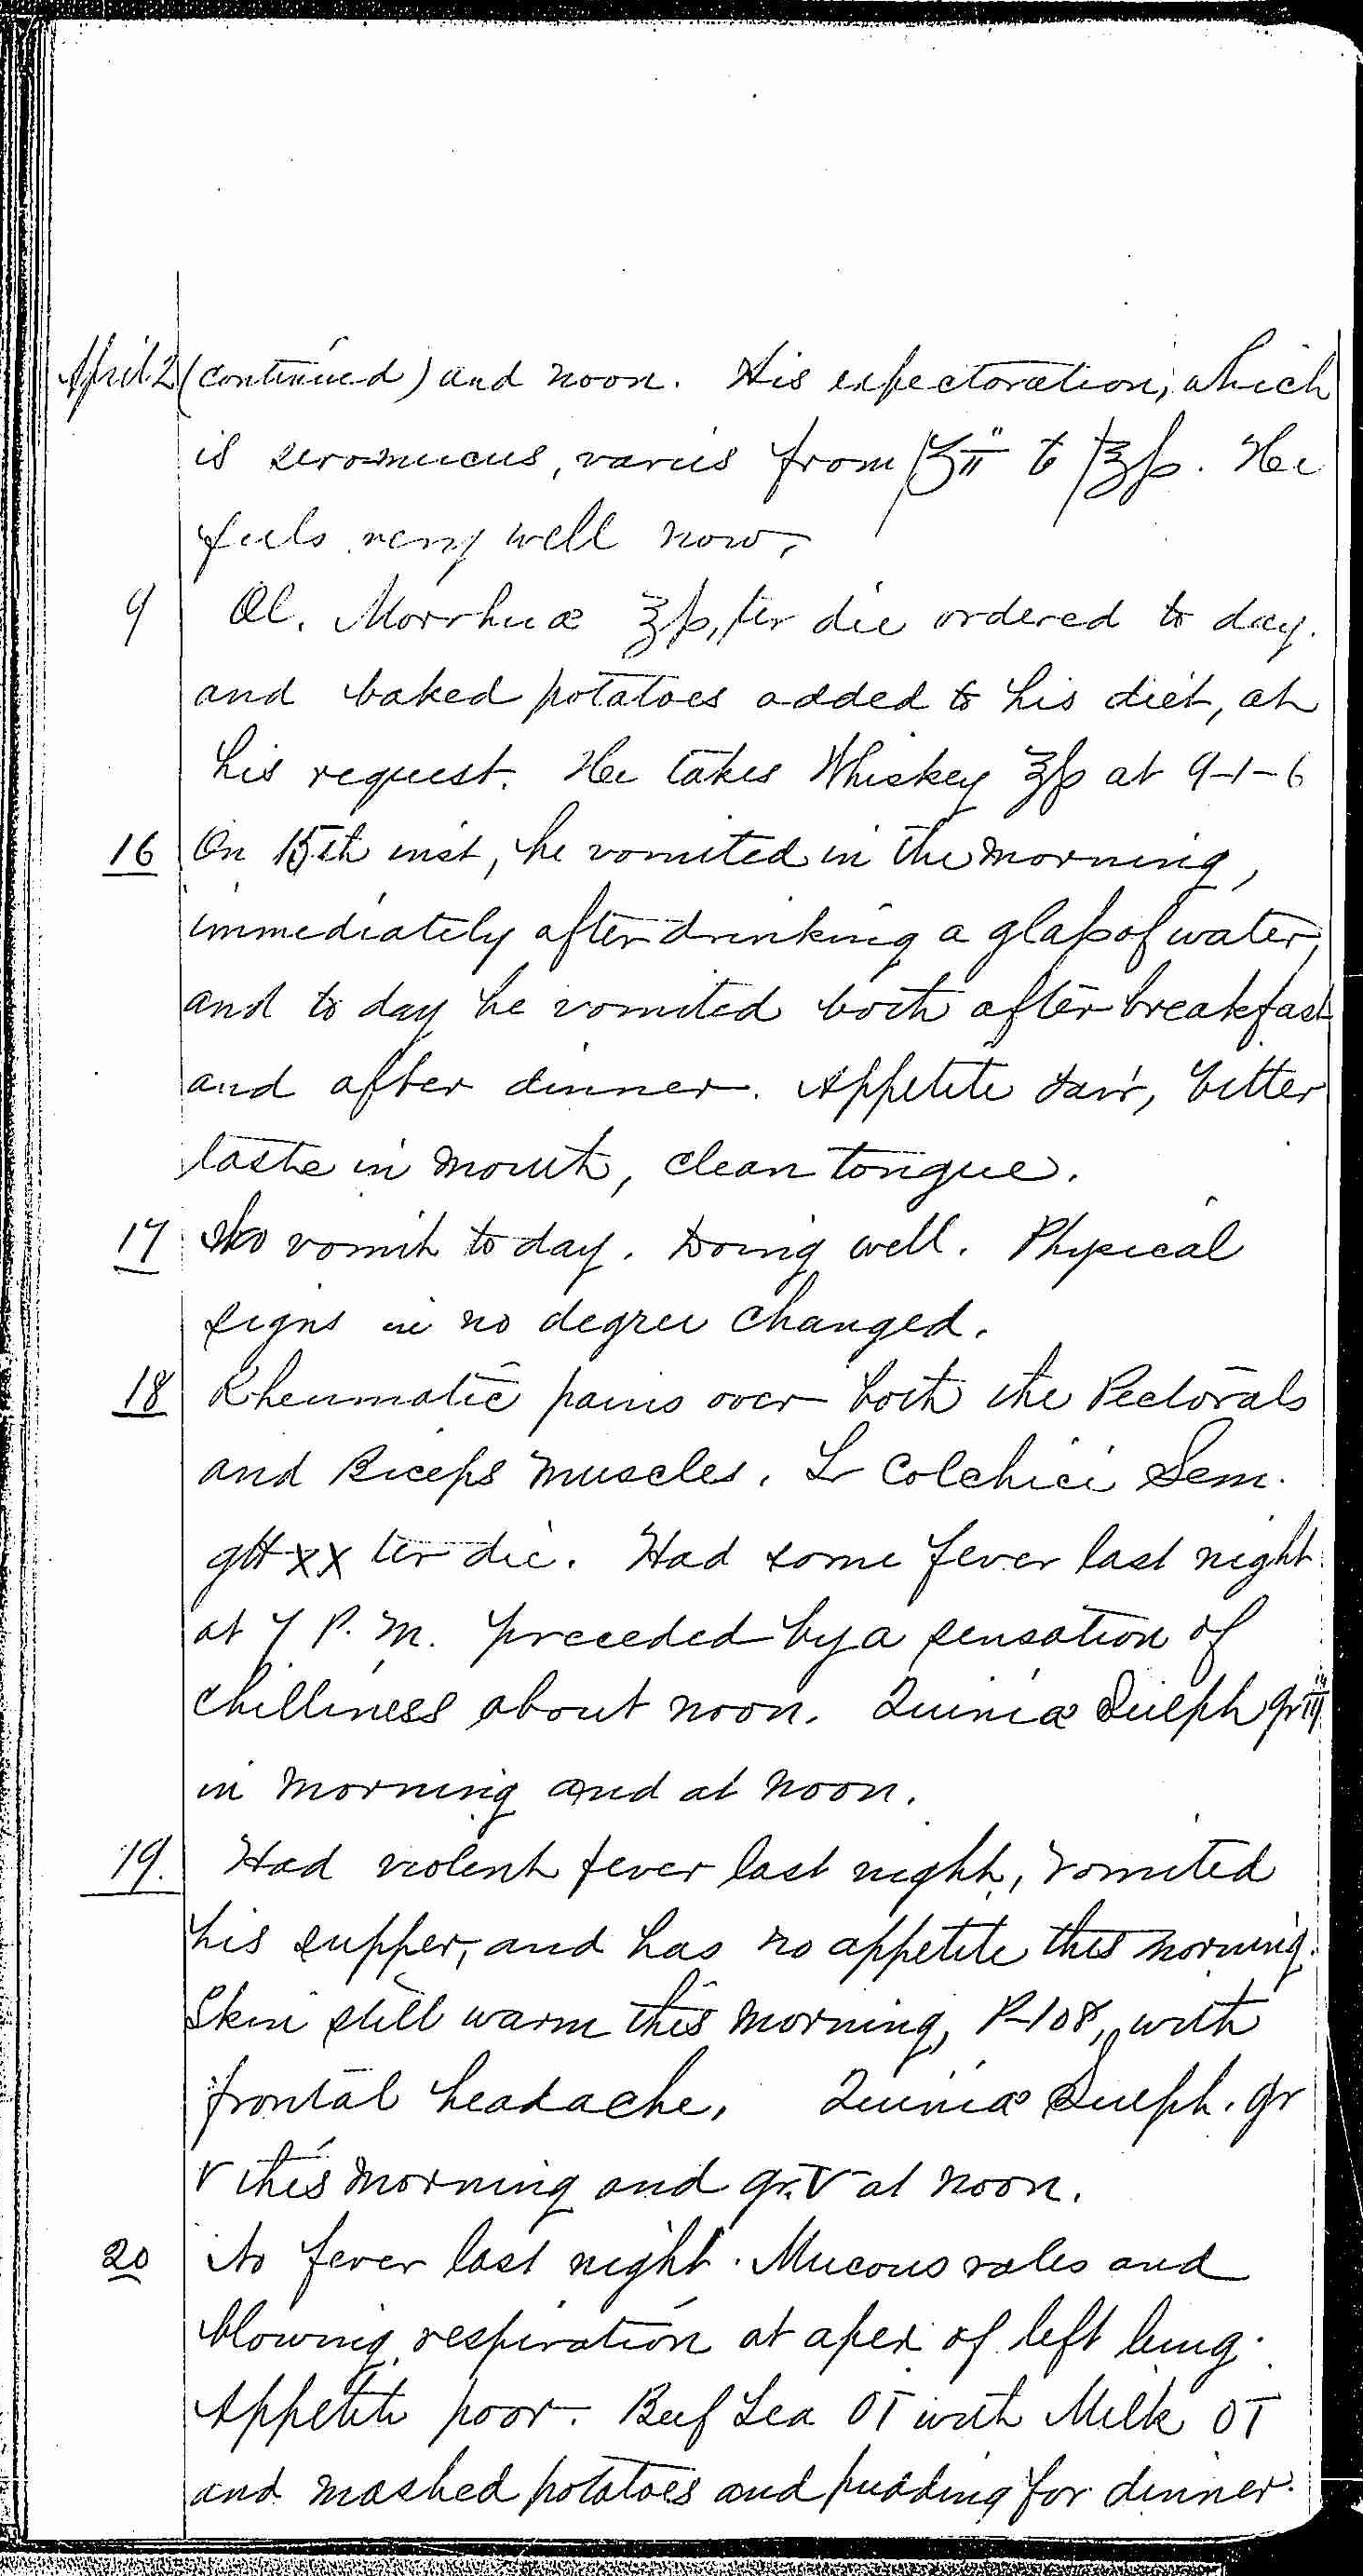 Entry for Richard Forn (page 18 of 21) in the log Hospital Tickets and Case Papers - Naval Hospital - Washington, D.C. - 1868-69